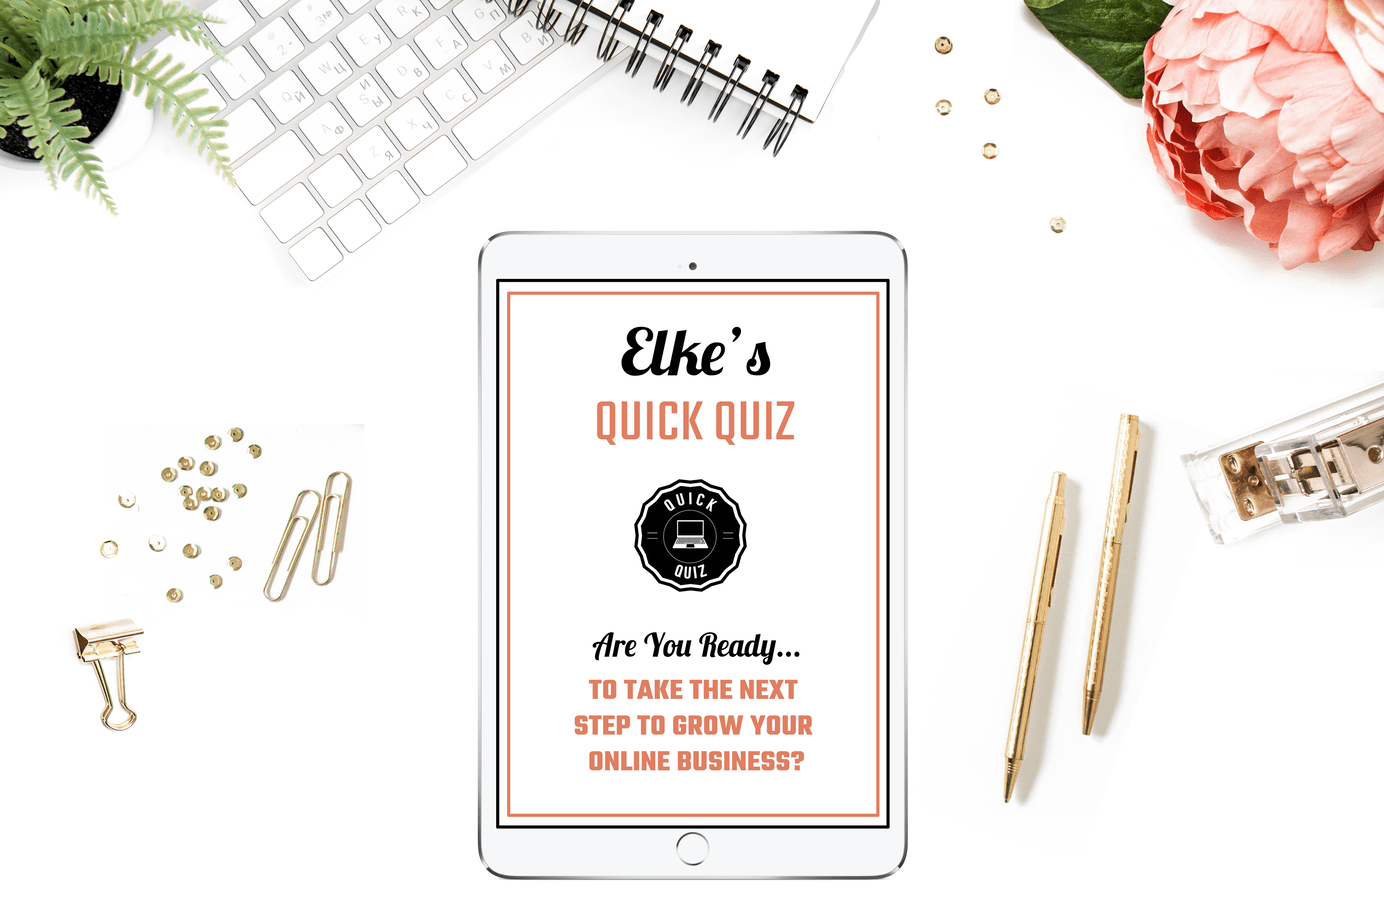 Elke Clarke's Quick Quiz on Are you ready to grow your online business using Zazzle?